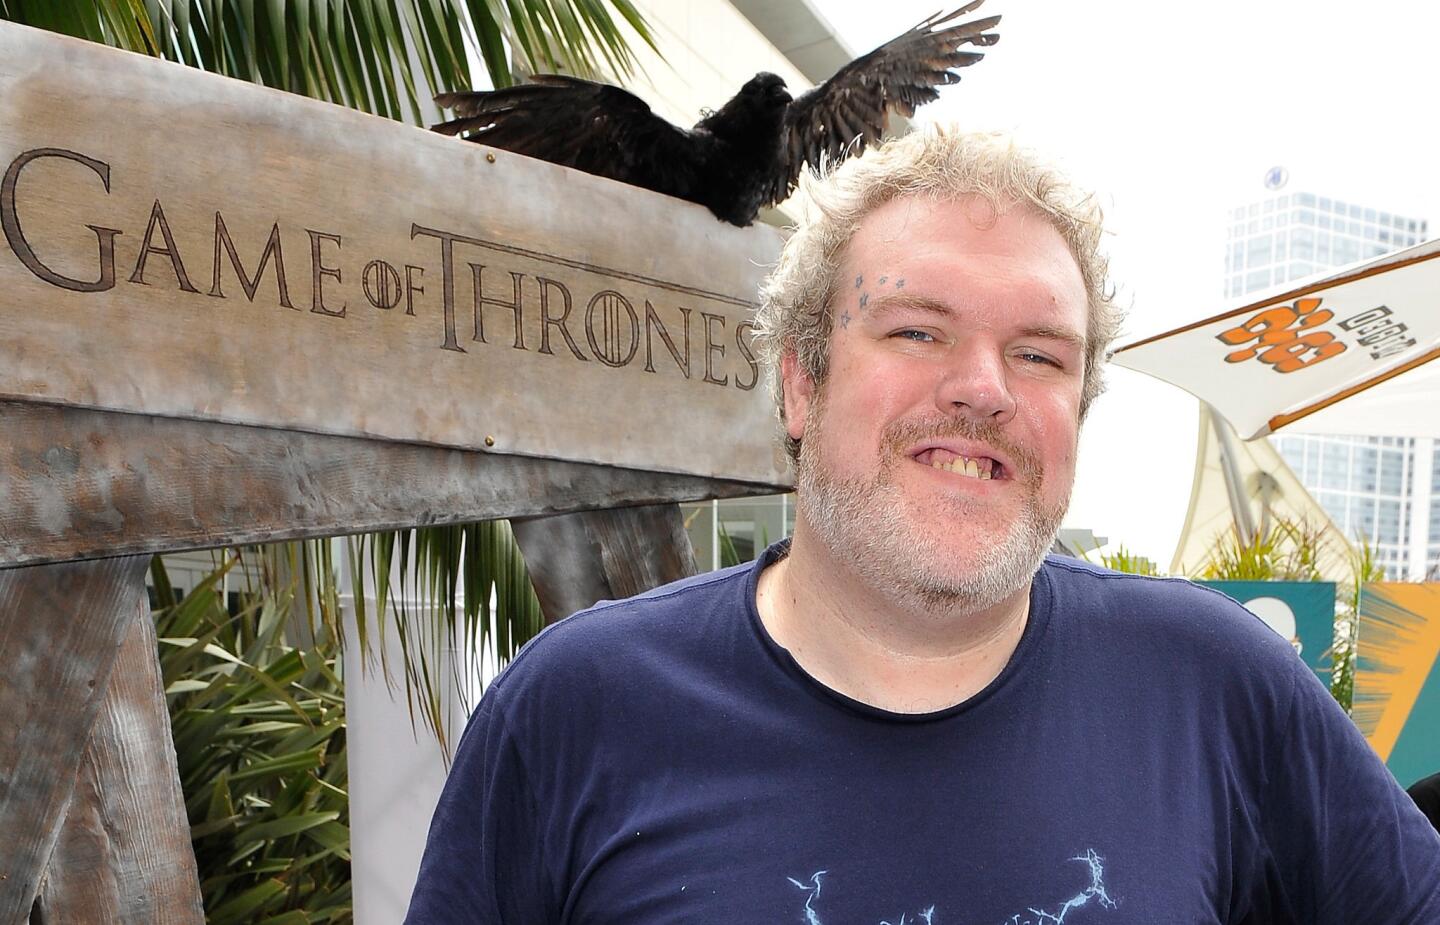 "Well, in all honesty, when you talk about 'the gay community,' you are talking about MY community," the "Game of Thrones" actor confirmed when asked about his large following among "bears" during an interview with fan blog Winter Is Coming in March 2014.